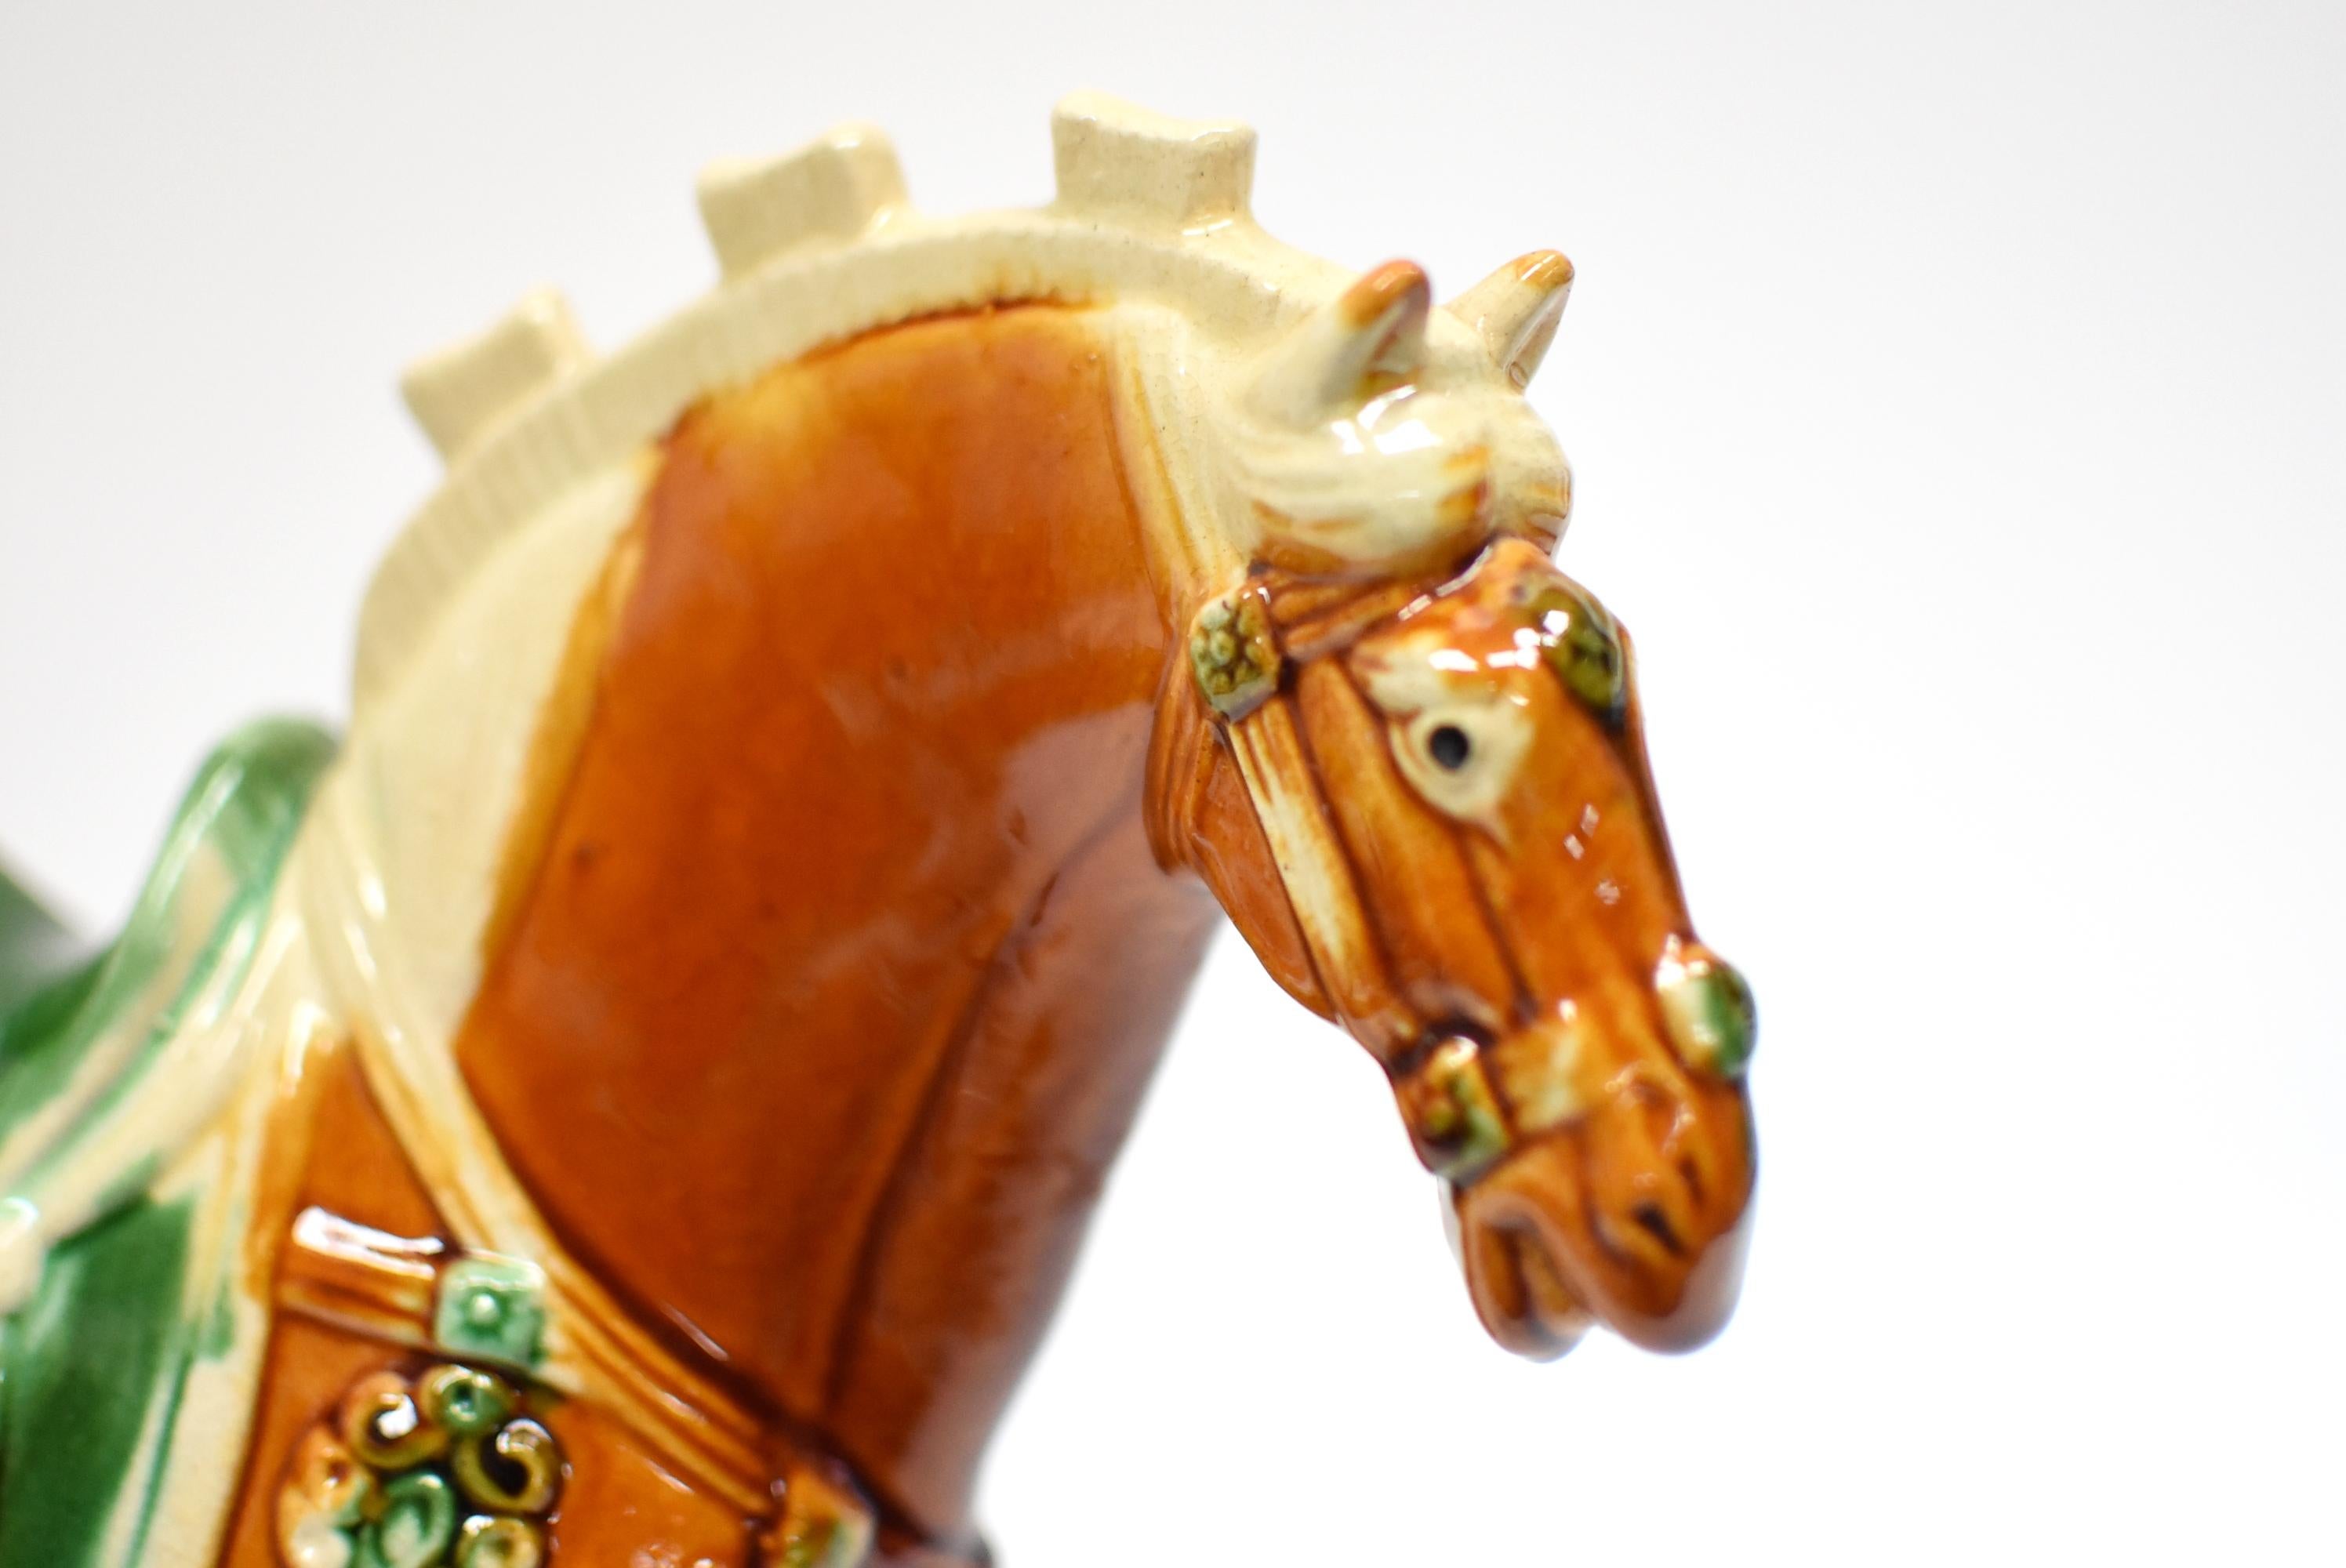 A beautiful caramel color San Cai horse in high gloss. The Sancai technique dates back to the Tang dynasty (618–907AD). His muscles are well defined. His expression vivid. The horse is decorated with fancy bells and a green saddle. Sancai sculptures